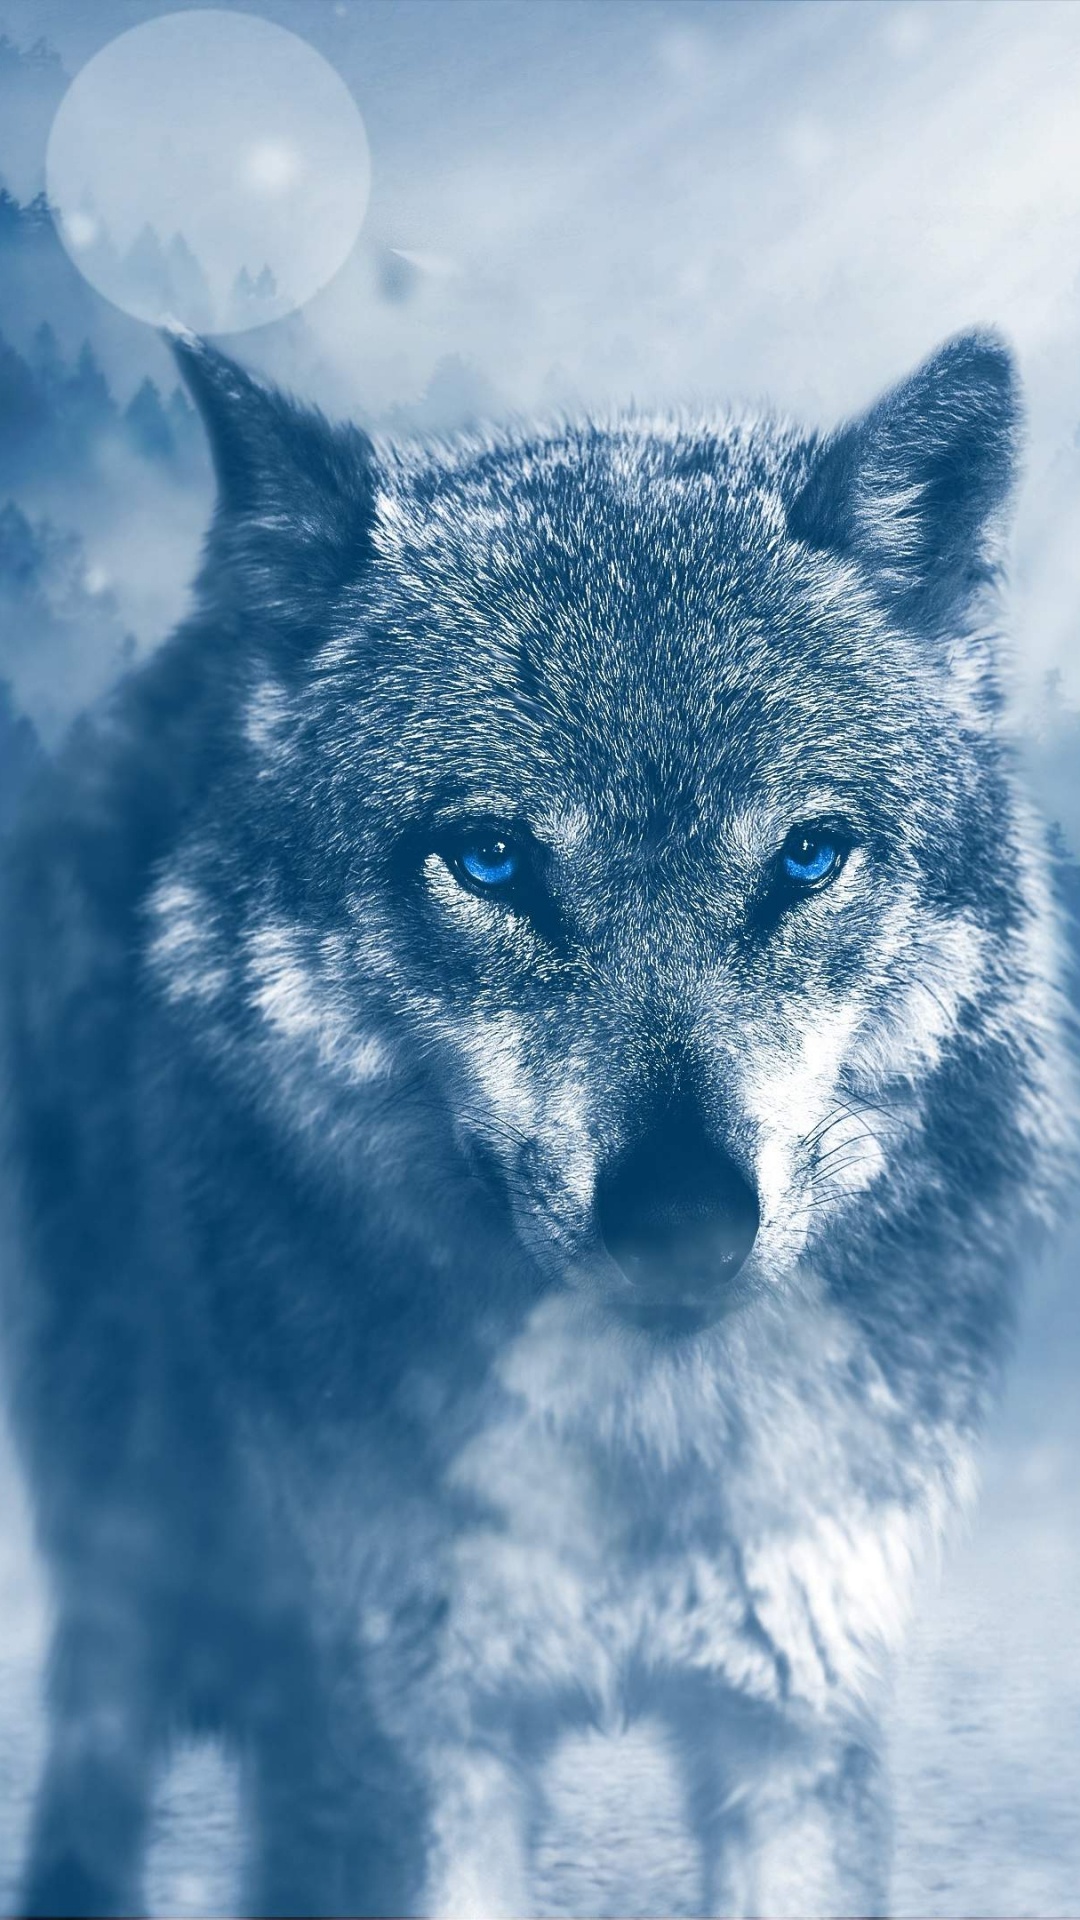 Gray Wolf on Snow Covered Ground. Wallpaper in 1080x1920 Resolution